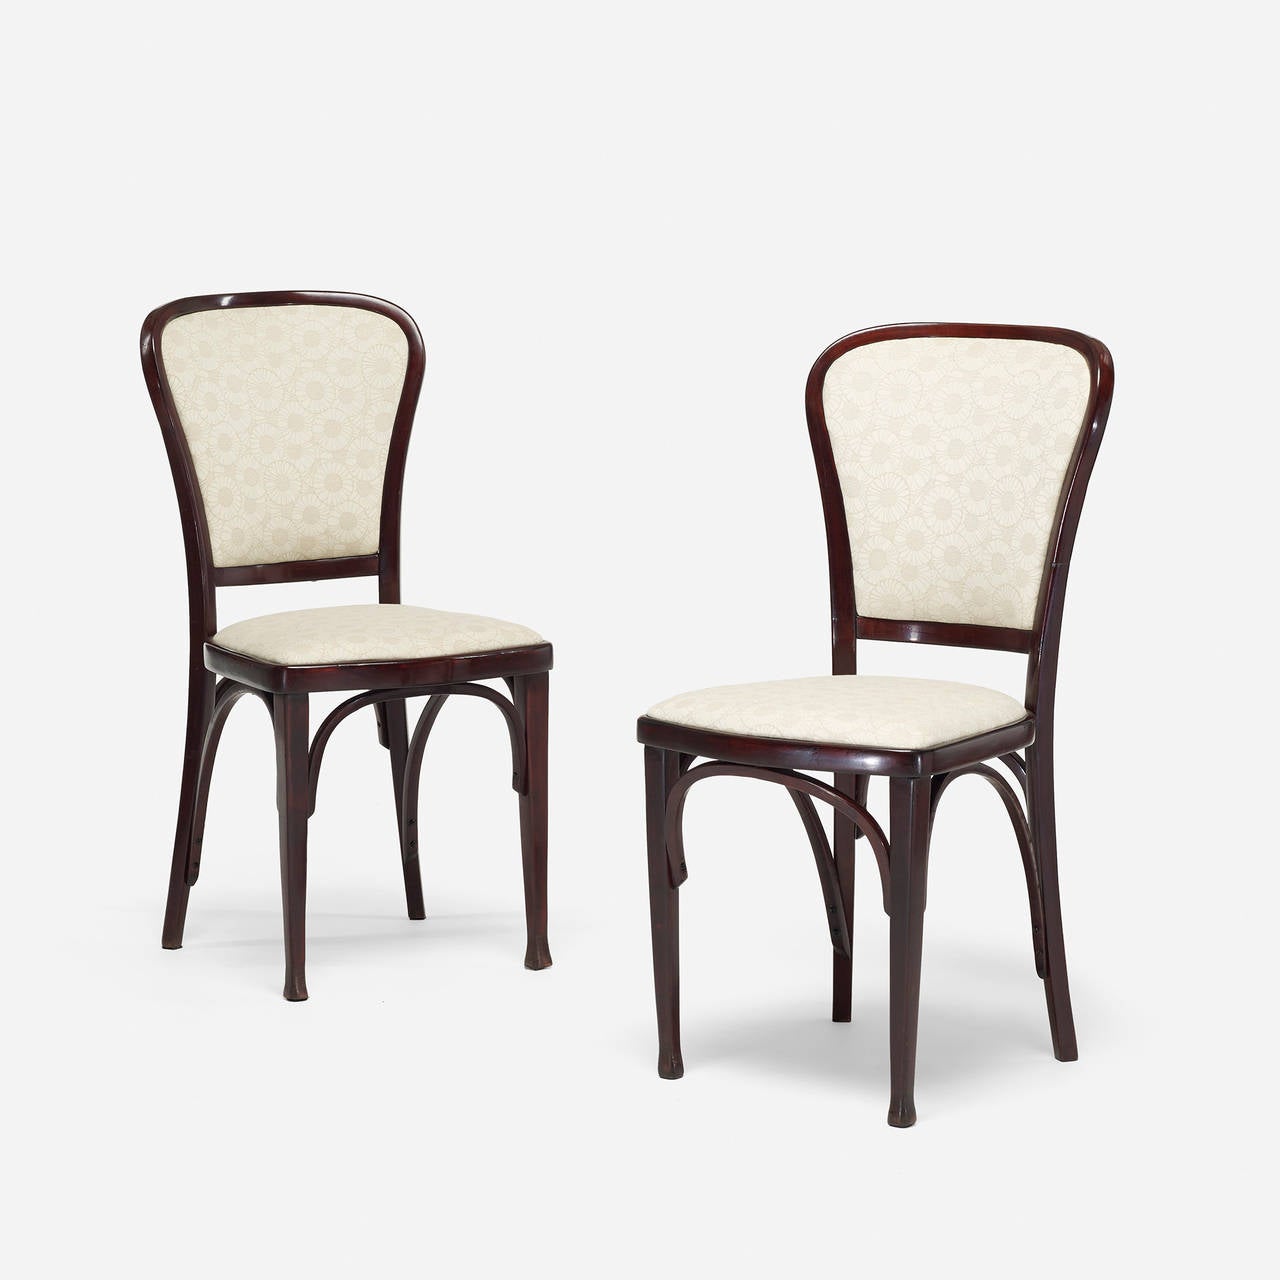 dining chairs, set of twelve by Gustav Siegel for Thonet - Signed with applied partial paper manufacturer's label to underside of each example: [Thonet]. Signed with branded manufacturer's mark to underside of each example: [Thonet].